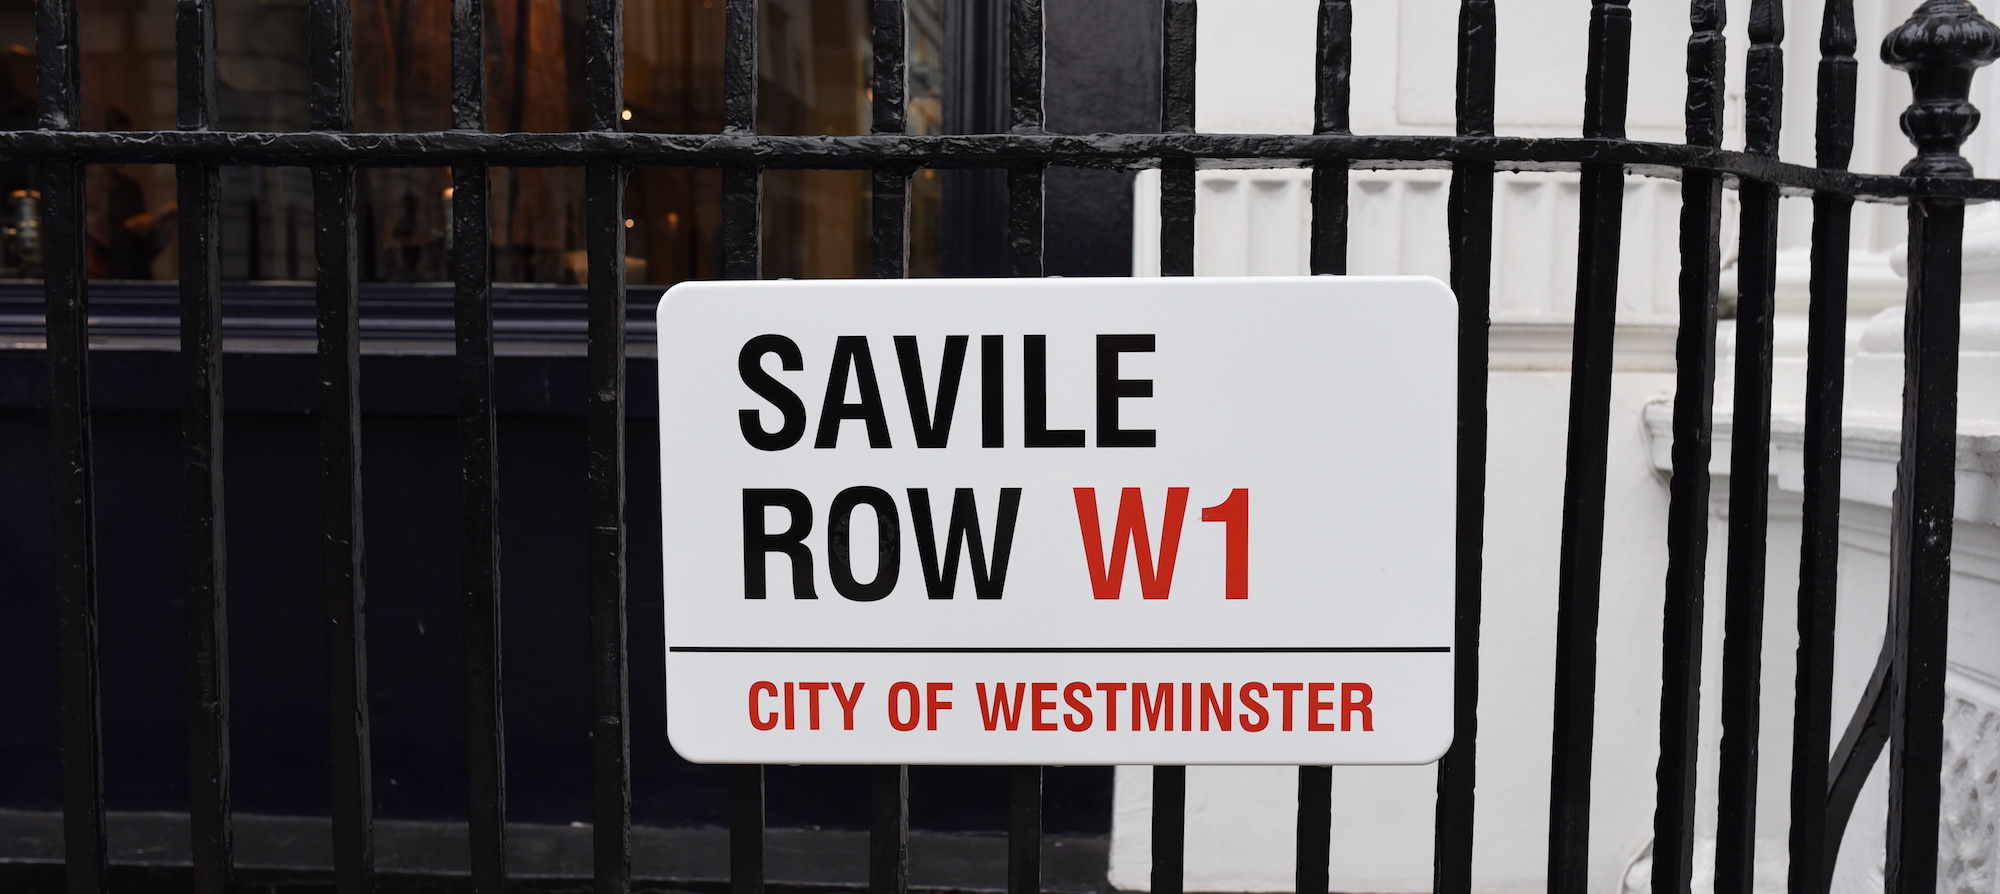 savile row w1 city of westminster sign